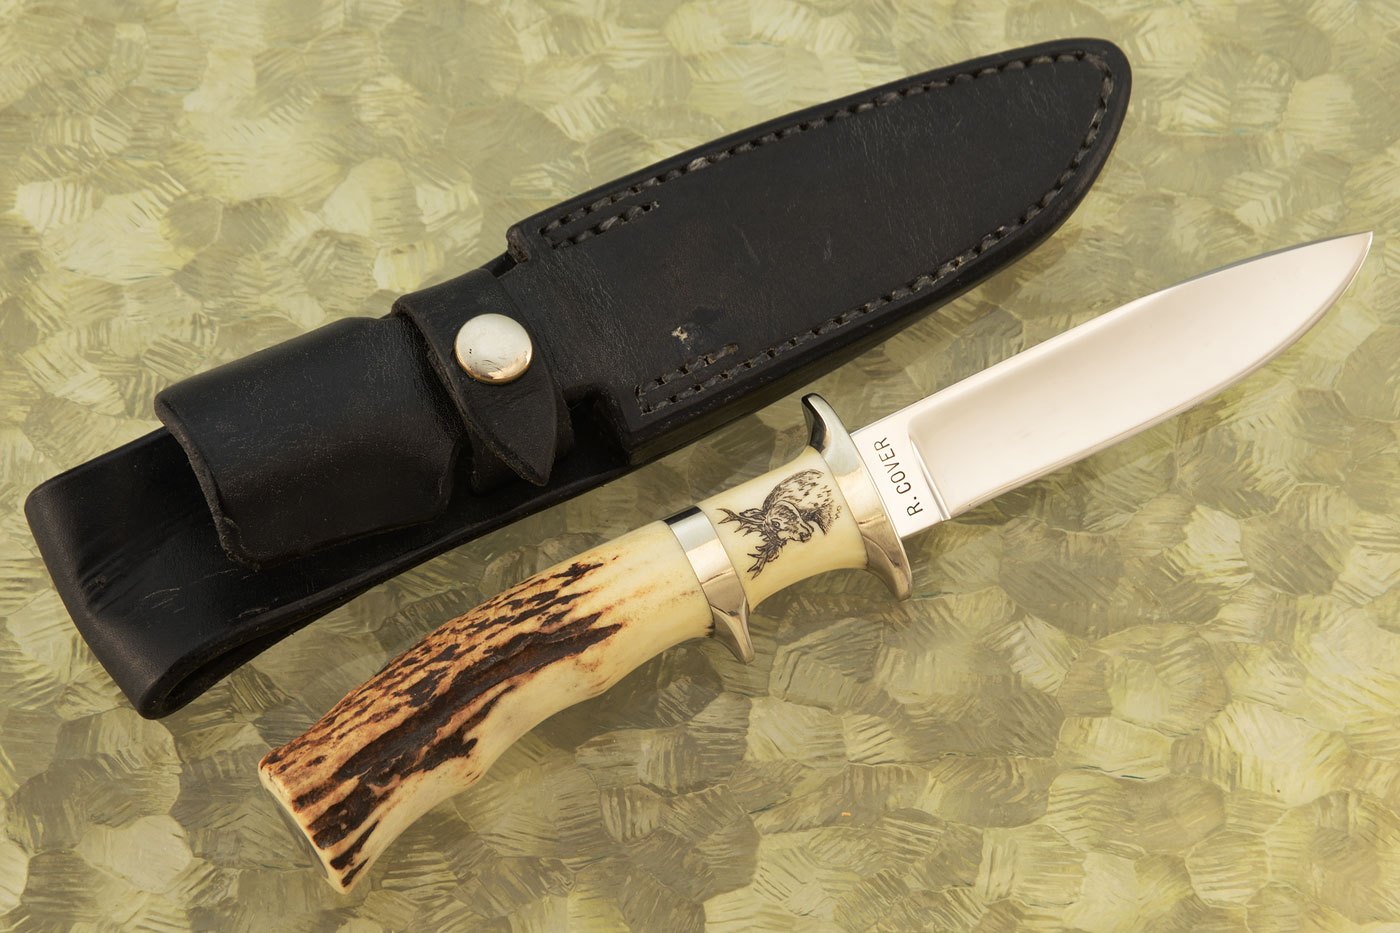 Subhilt Fighter with Stag